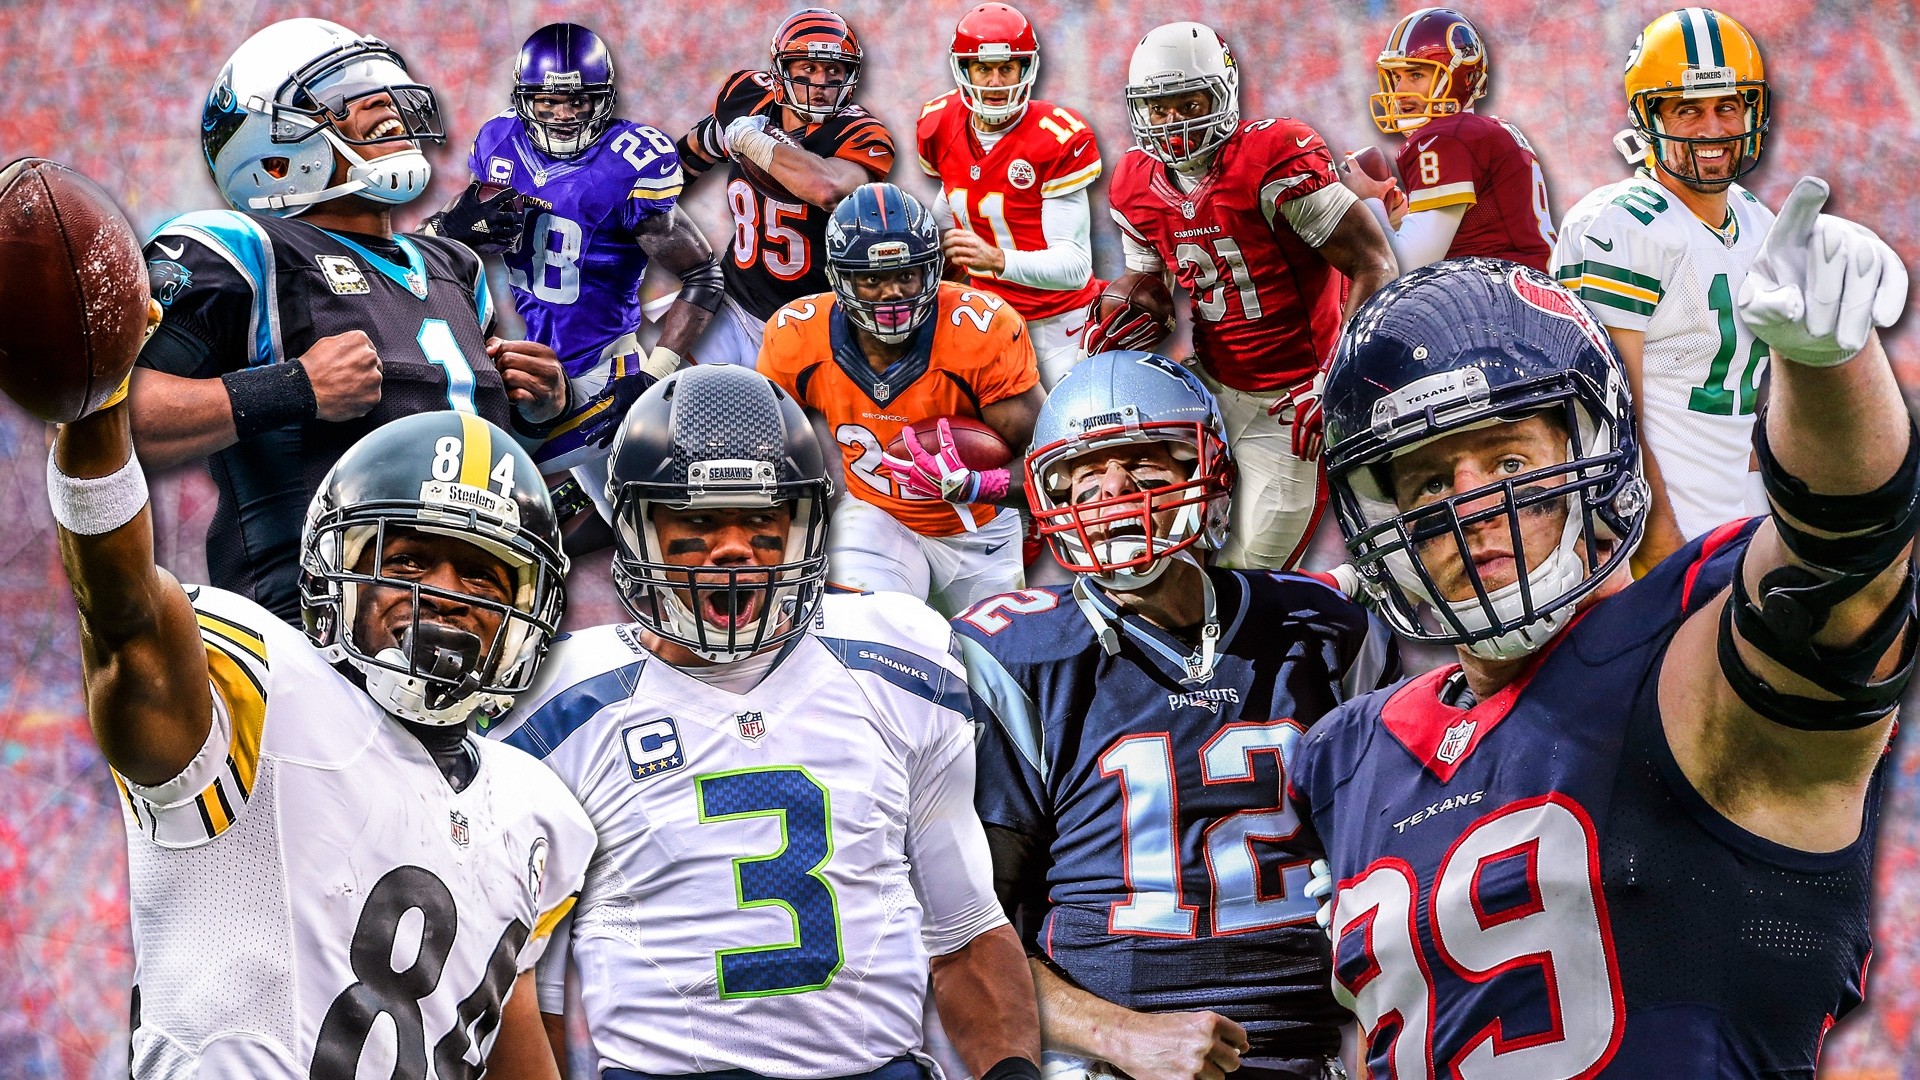 NFL Backgrounds HD With Resolution 1920X1080